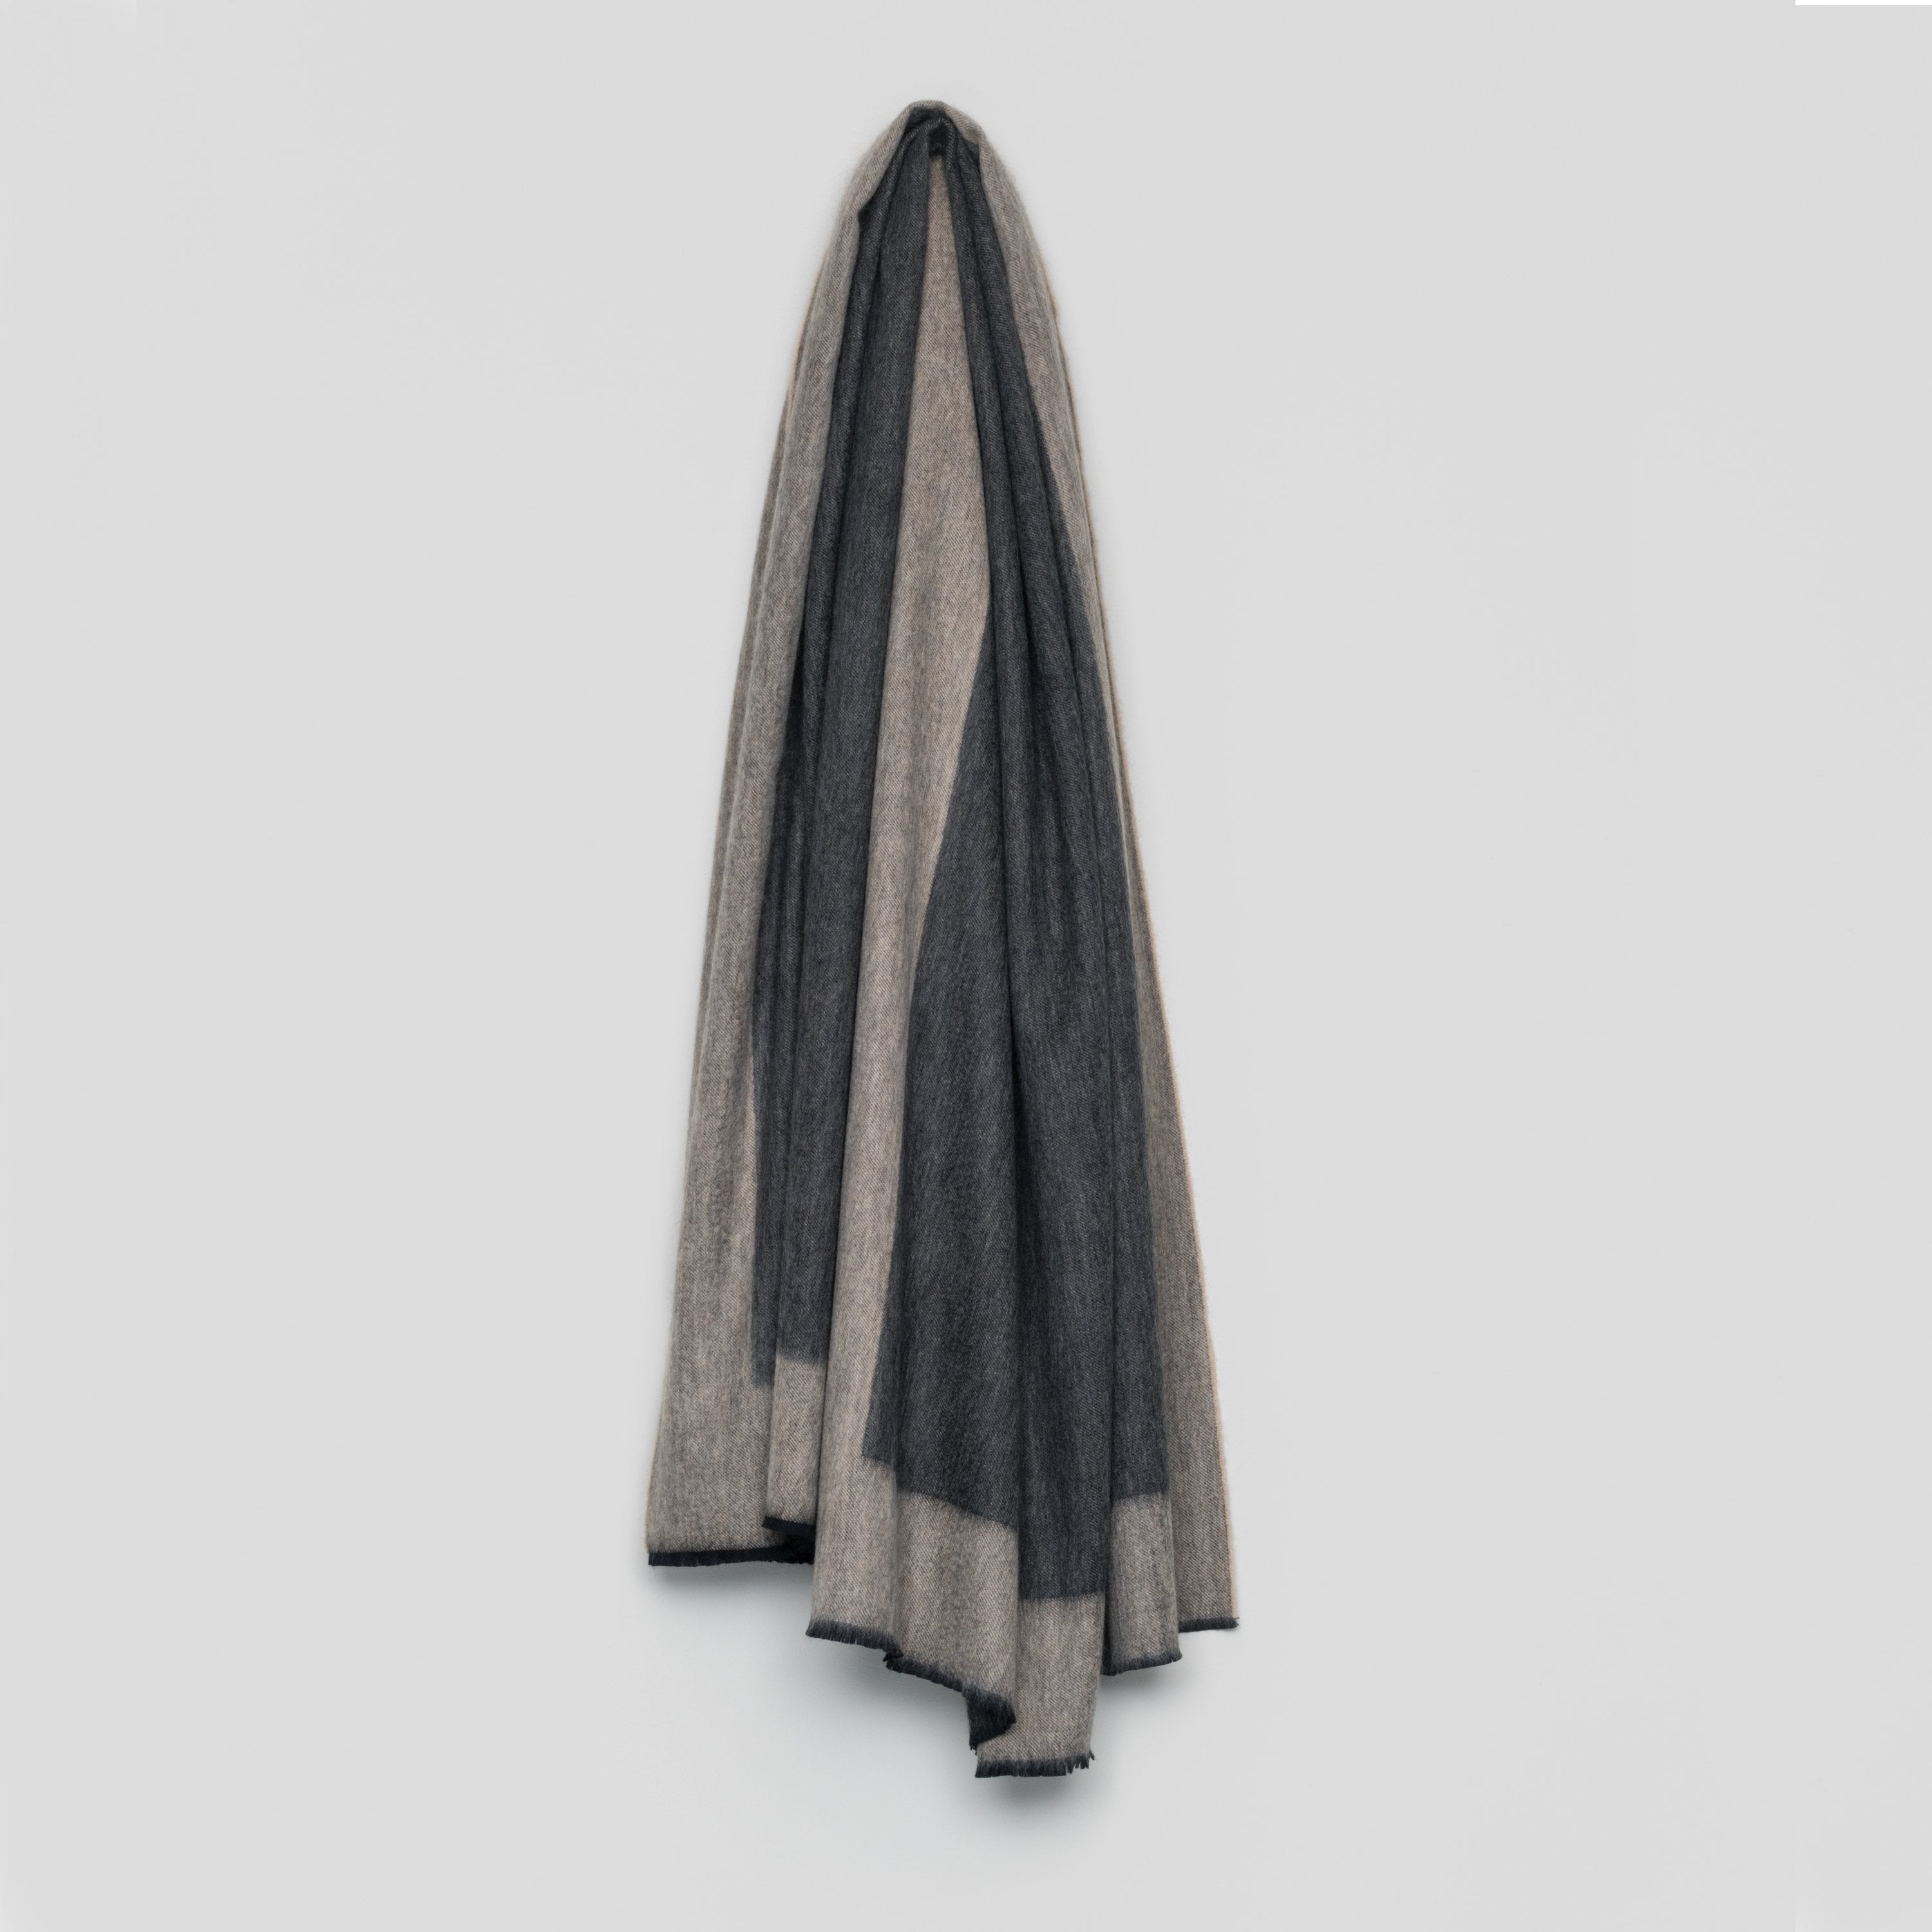 Cashmere Border Throw is a luxurious fibre that is lofty, soft, it does not pile and should last you a lifetime.